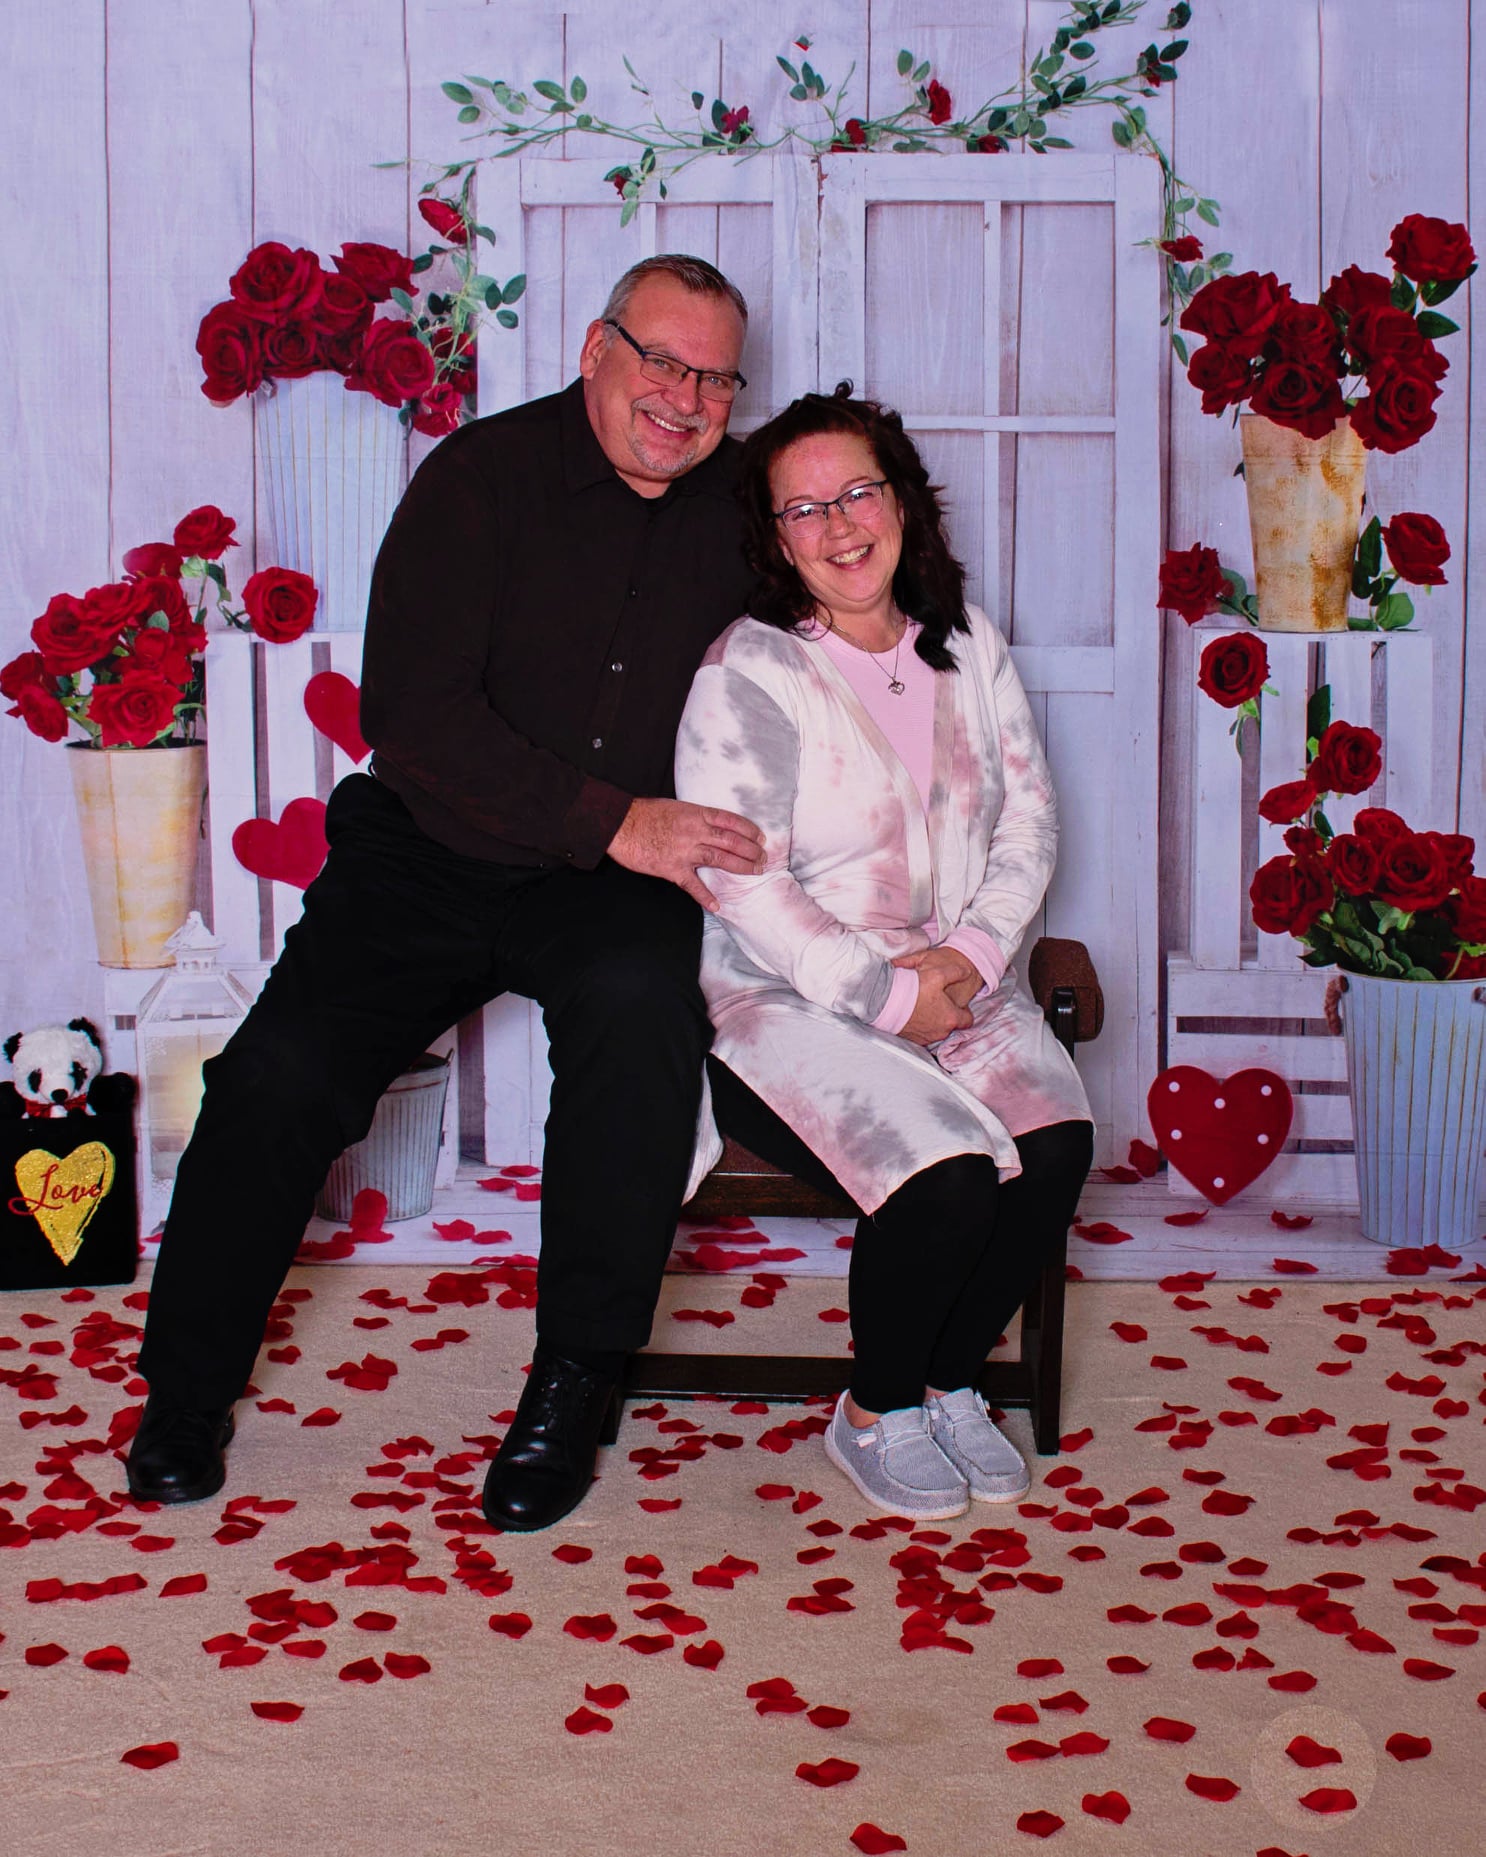 Kate Valentine's Day Backdrop White Wooden House Designed by Emetselch